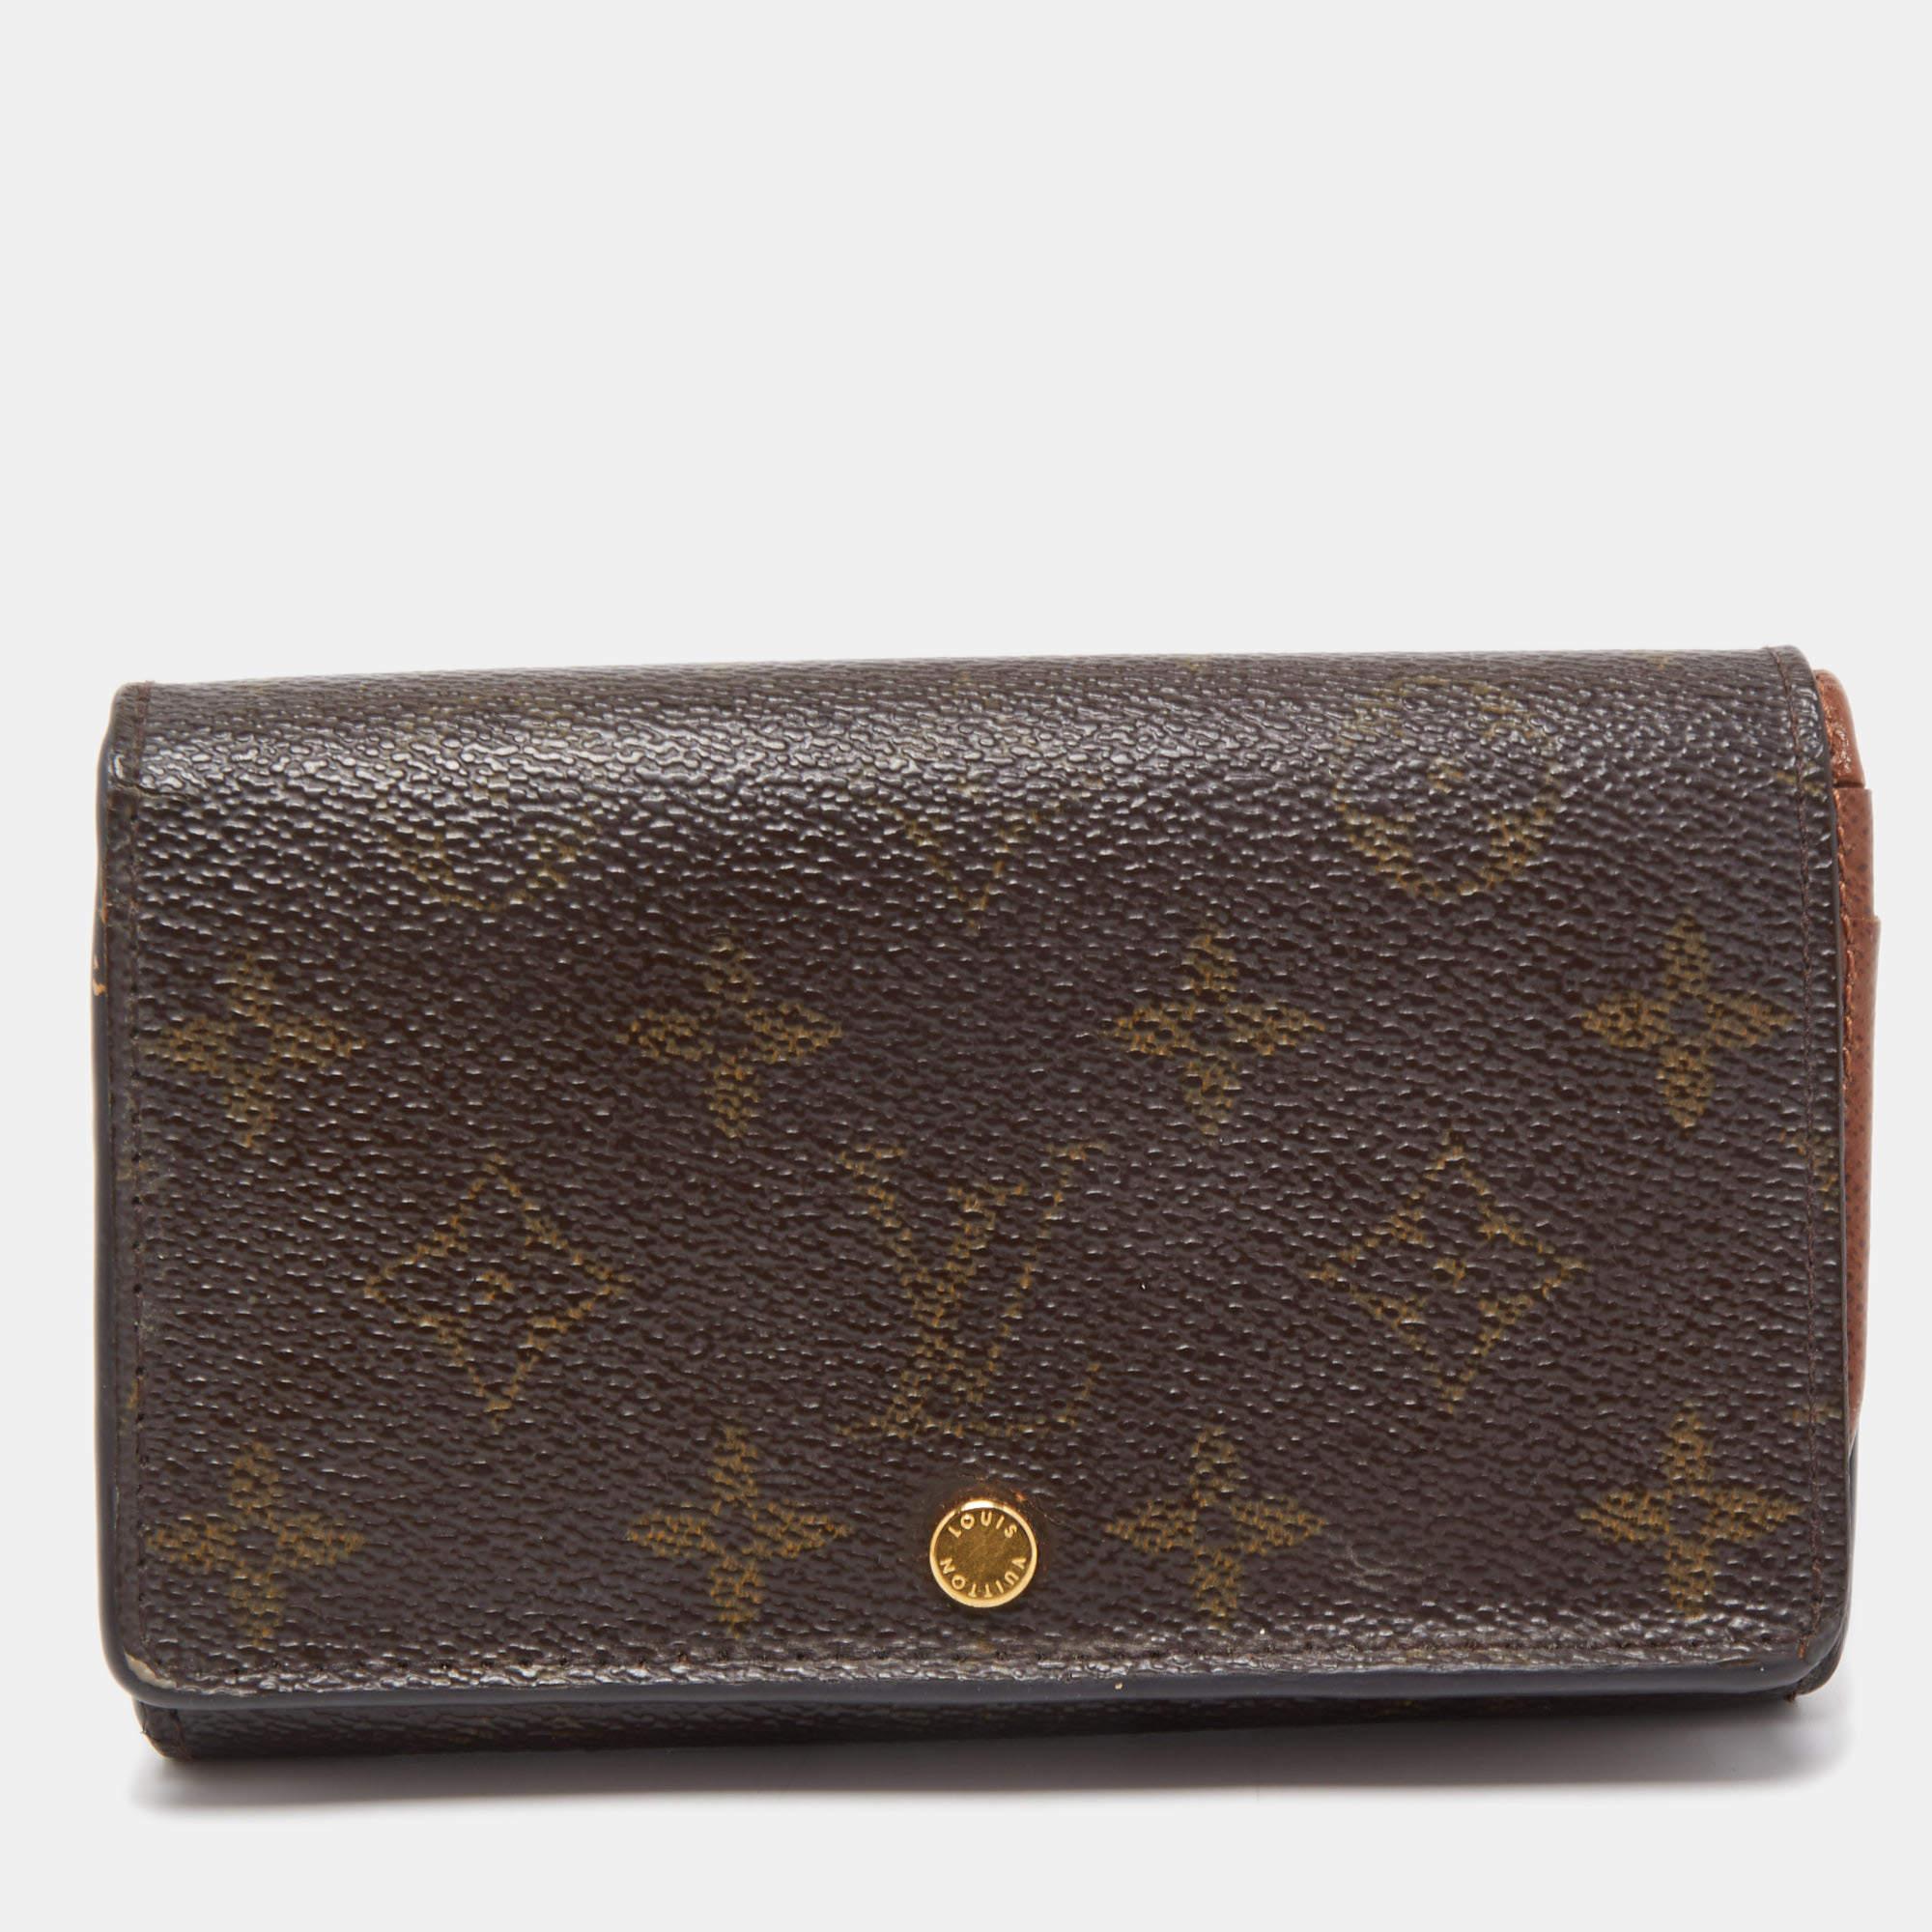 Louis Vuitton continues its history of delivering finely crafted accessories with this wallet. It has been crafted from Monogram canvas and is shaped beautifully. The wallet has a flap detail and press stud closure.

